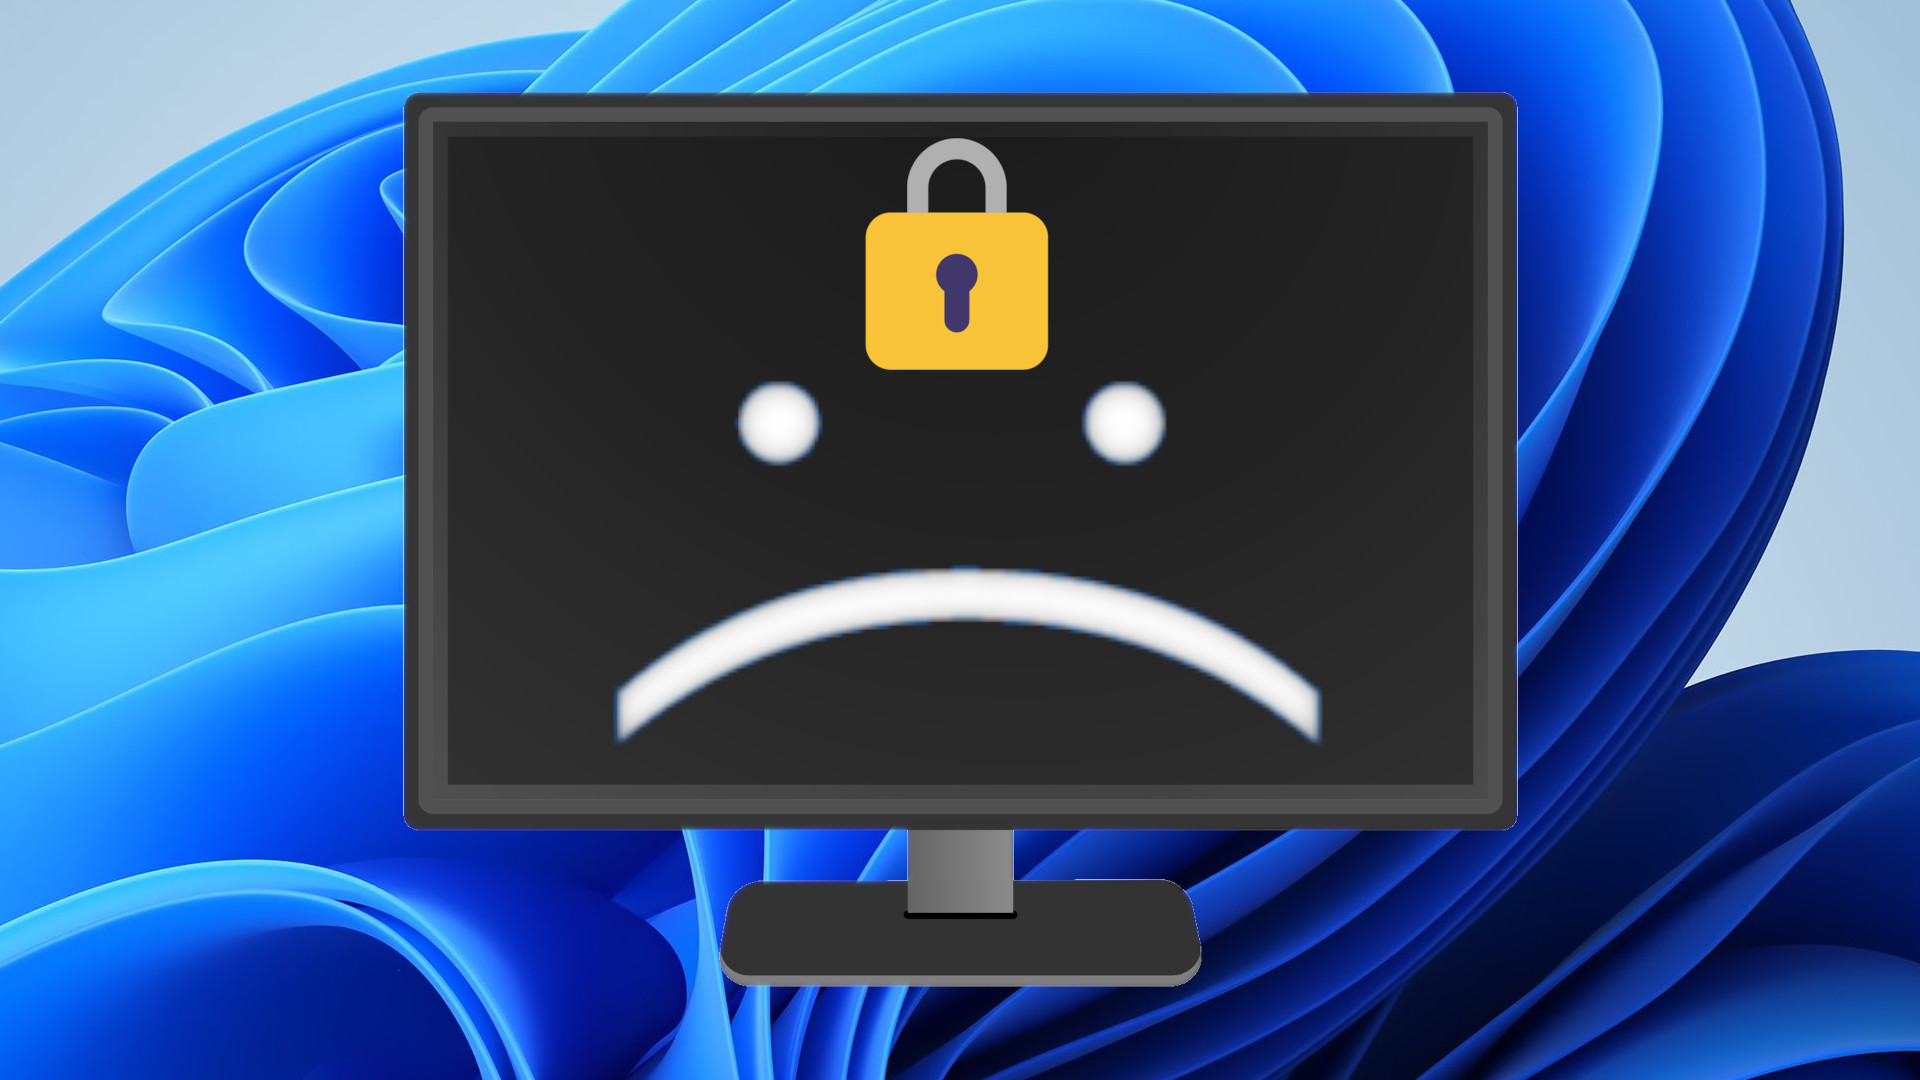 Windows 11 security update could lock you out of your own PC